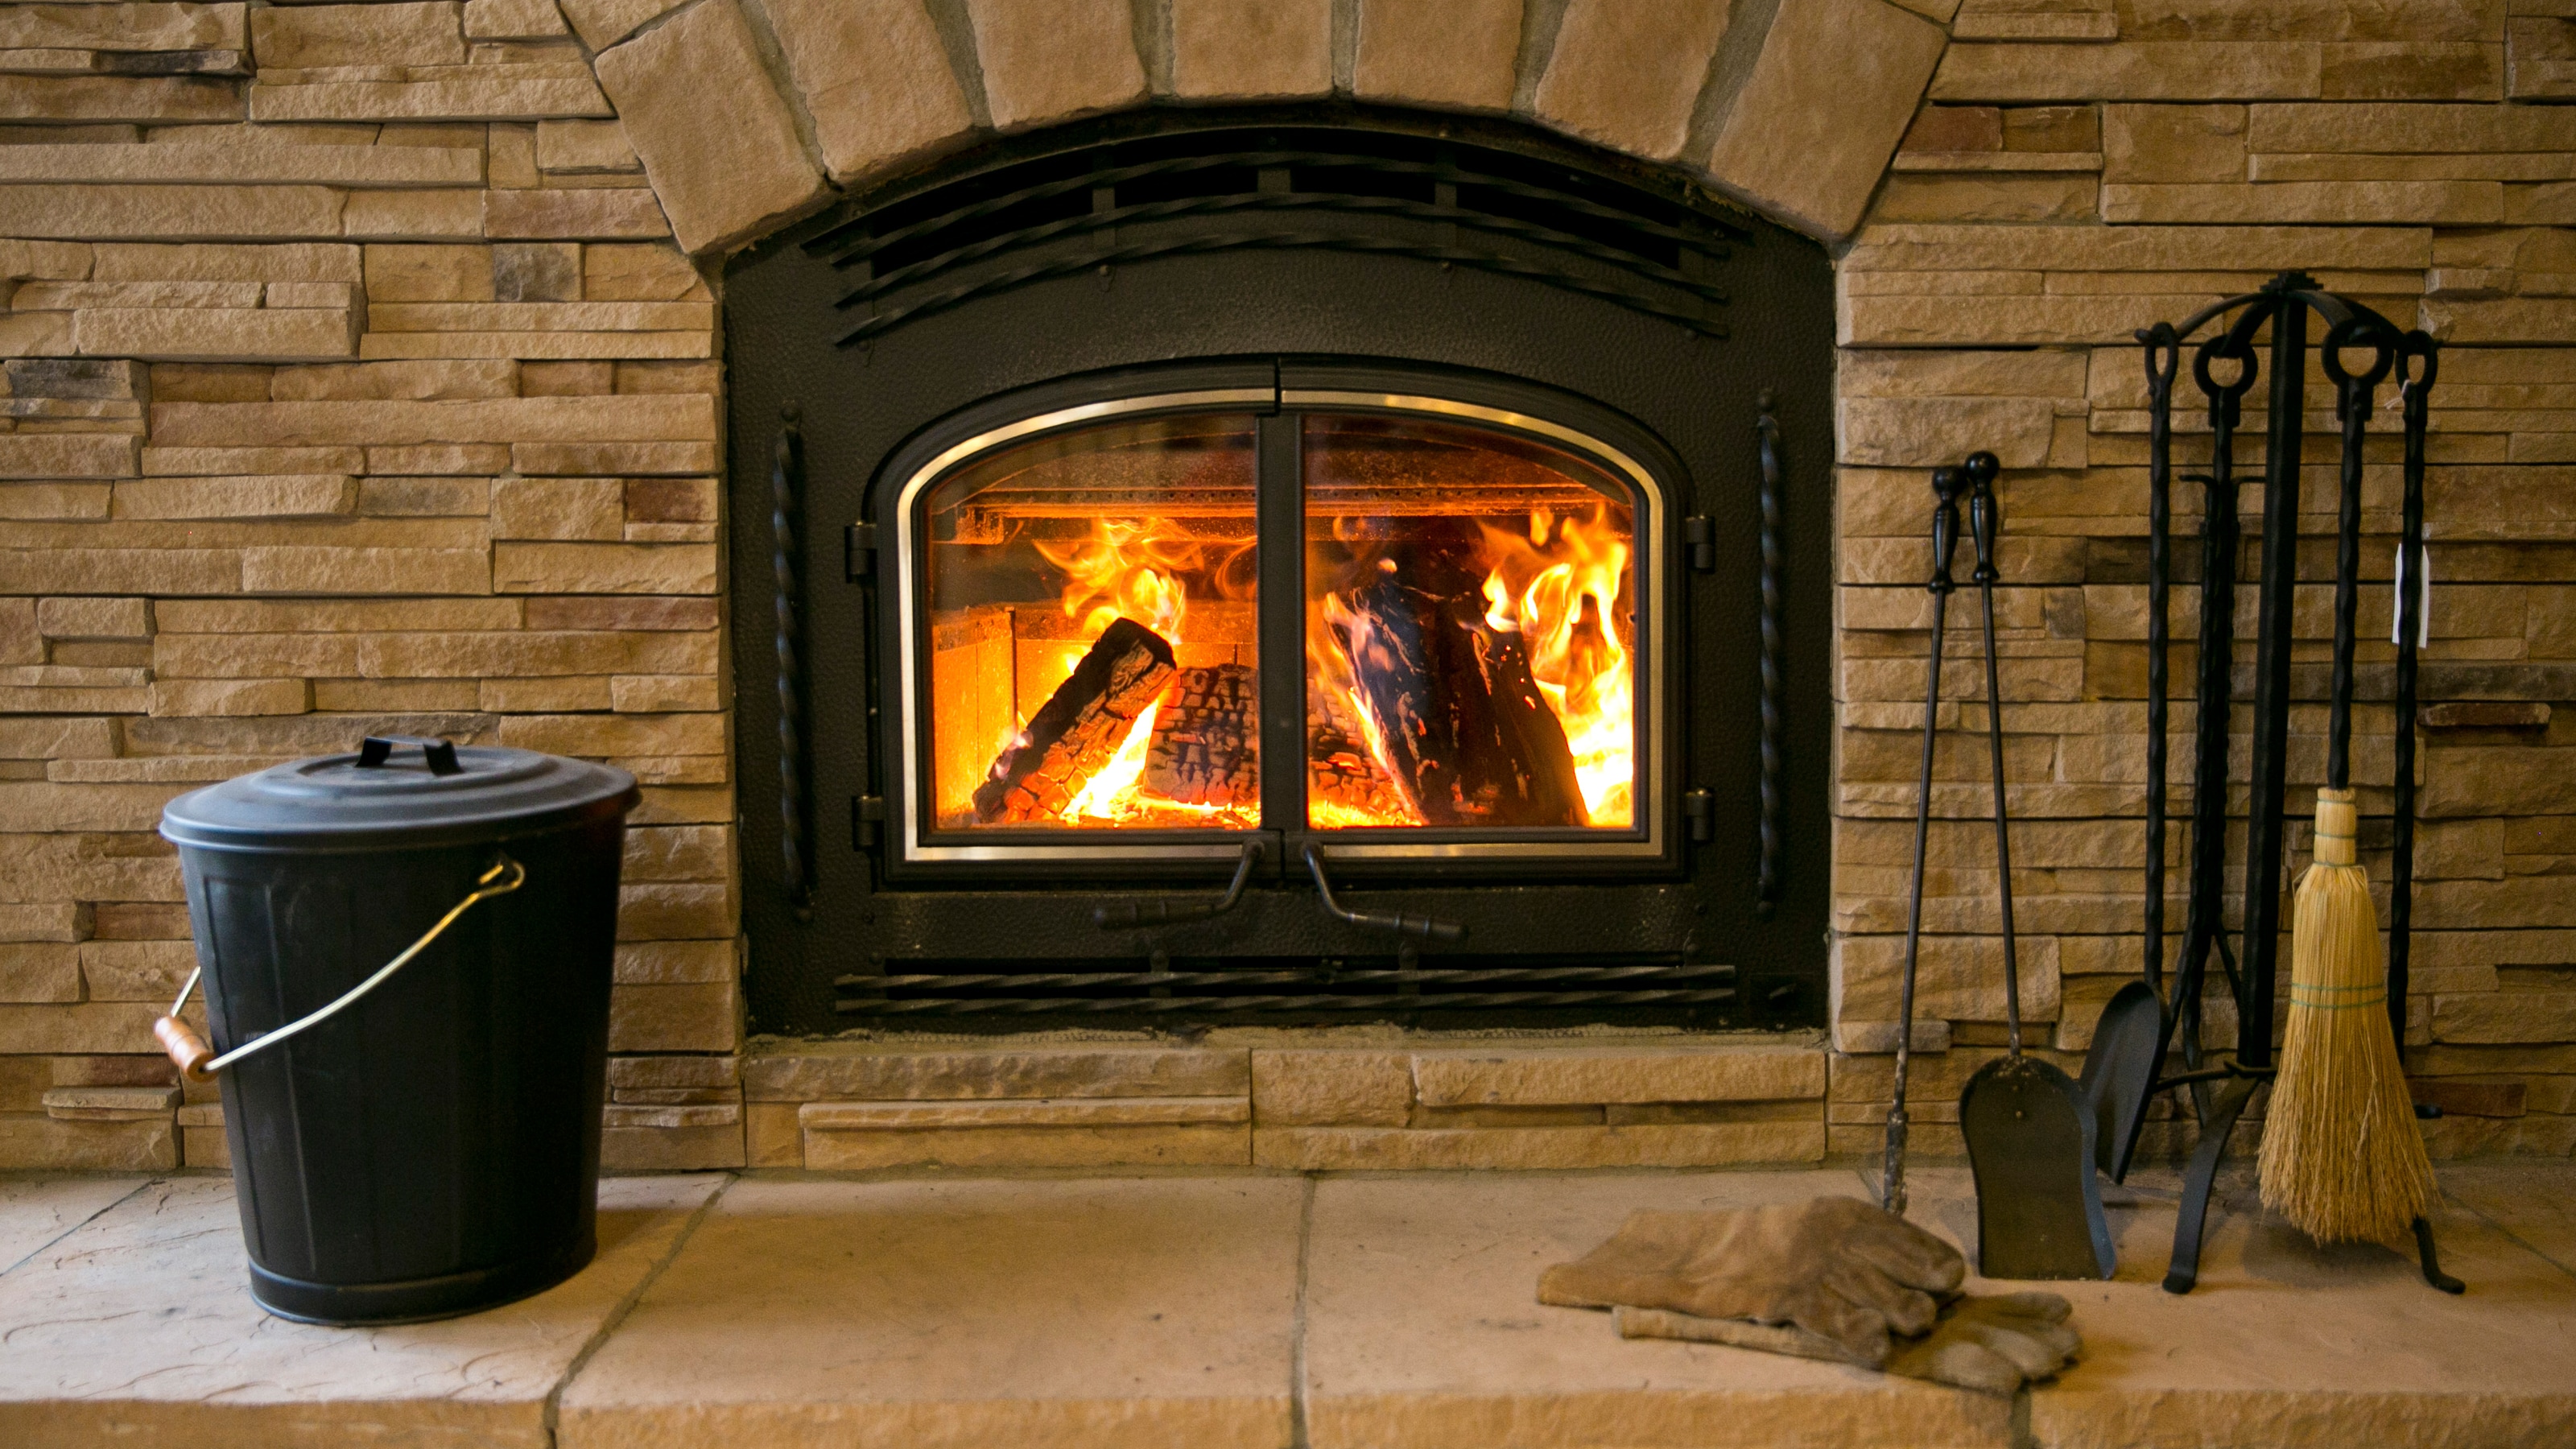 How to Build A Masonry Fireplace New How to Convert A Gas Fireplace to Wood Burning